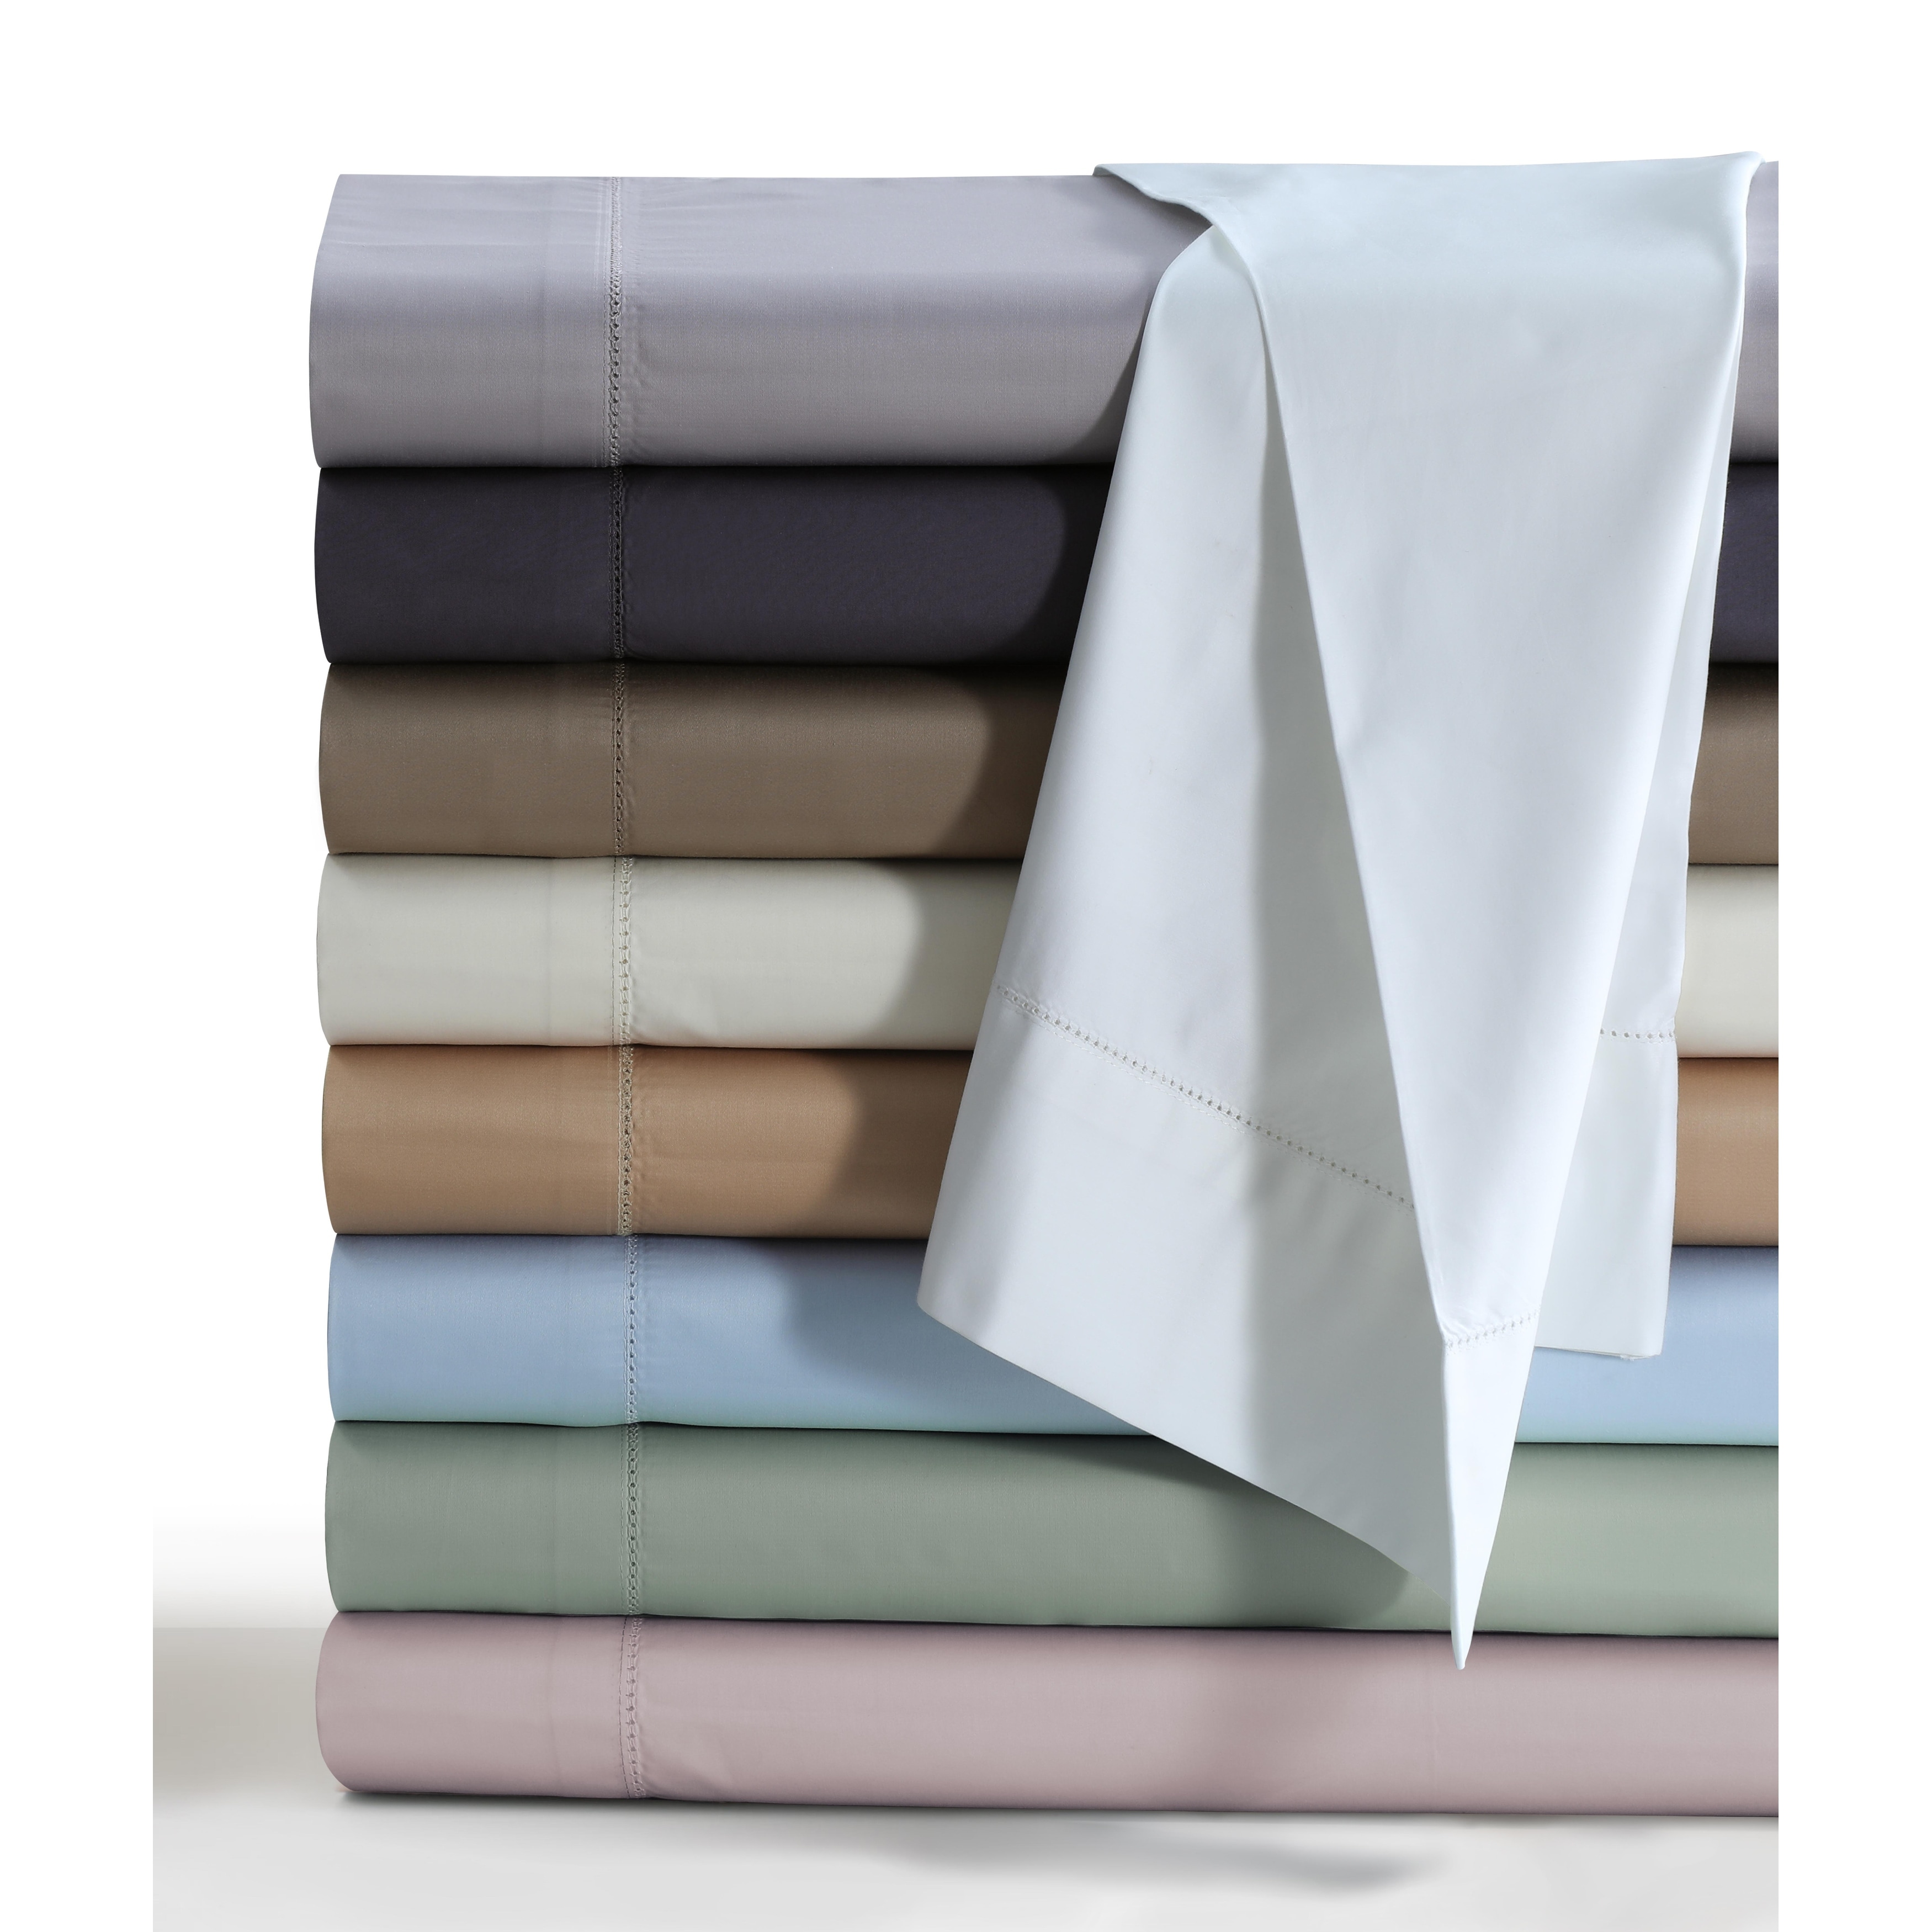 https://ak1.ostkcdn.com/images/products/is/images/direct/24b593d282bb5f01596c2a1aee5be4139765e137/Egyptian-Cotton-800-TC-Deep-Pocket-Sheet-Set-with-Luxury-size-Flat.jpg